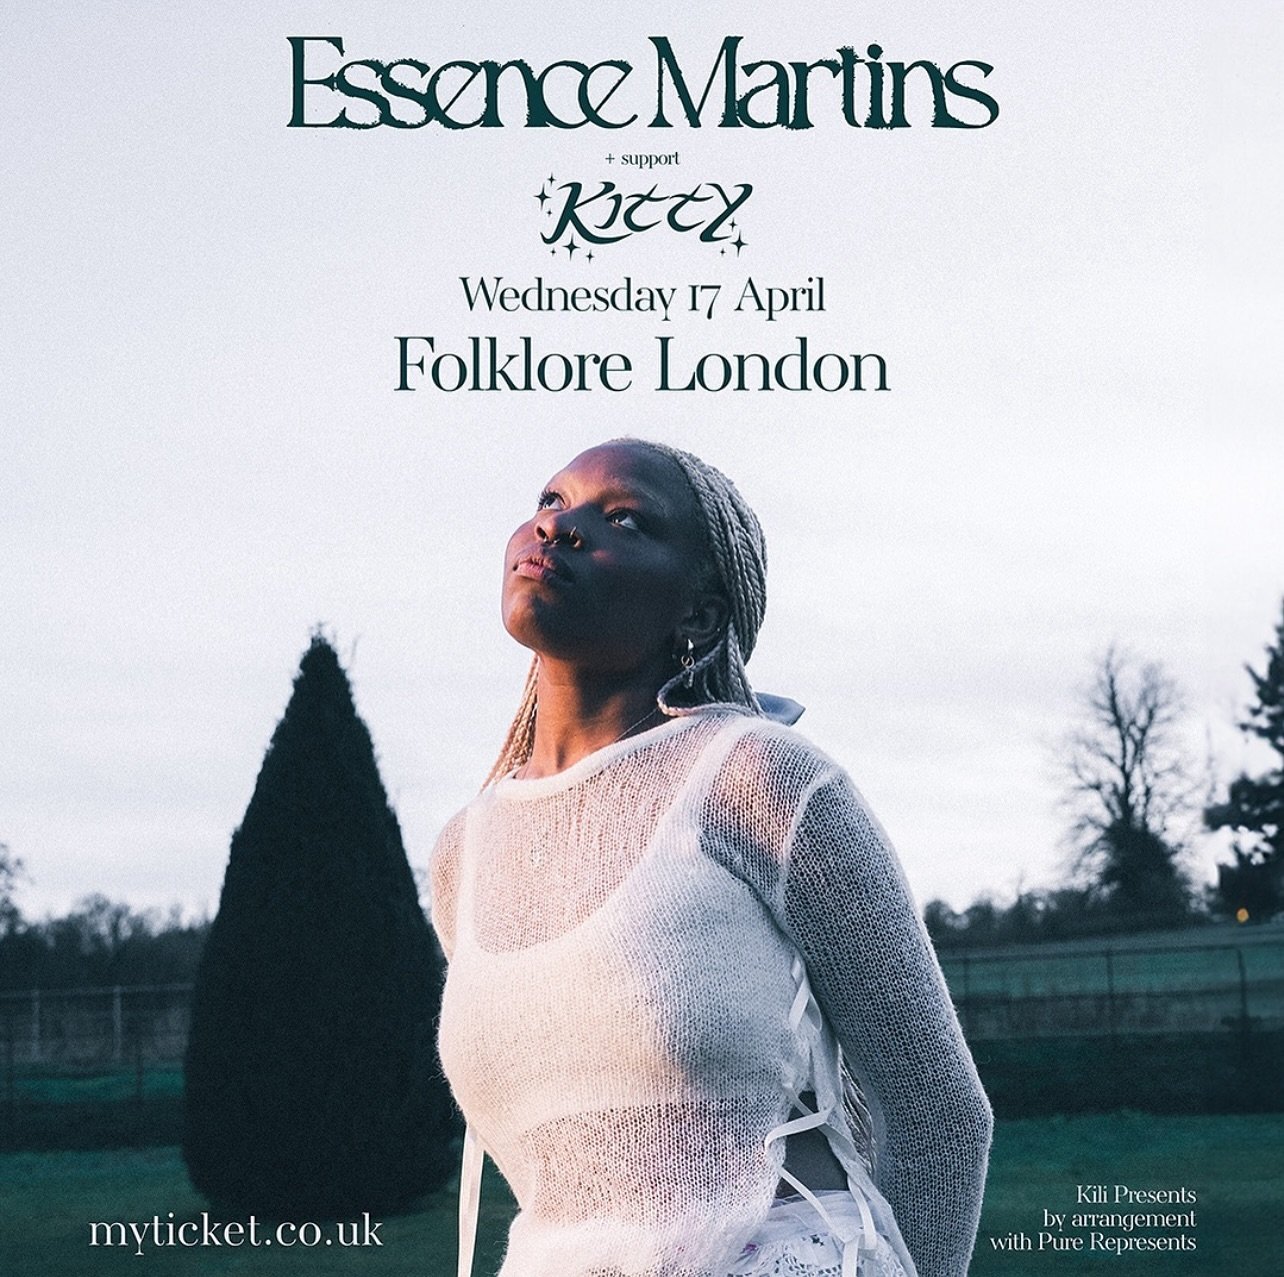 We can&rsquo;t wait for Essence Martins&rsquo; show tonight! ❤️